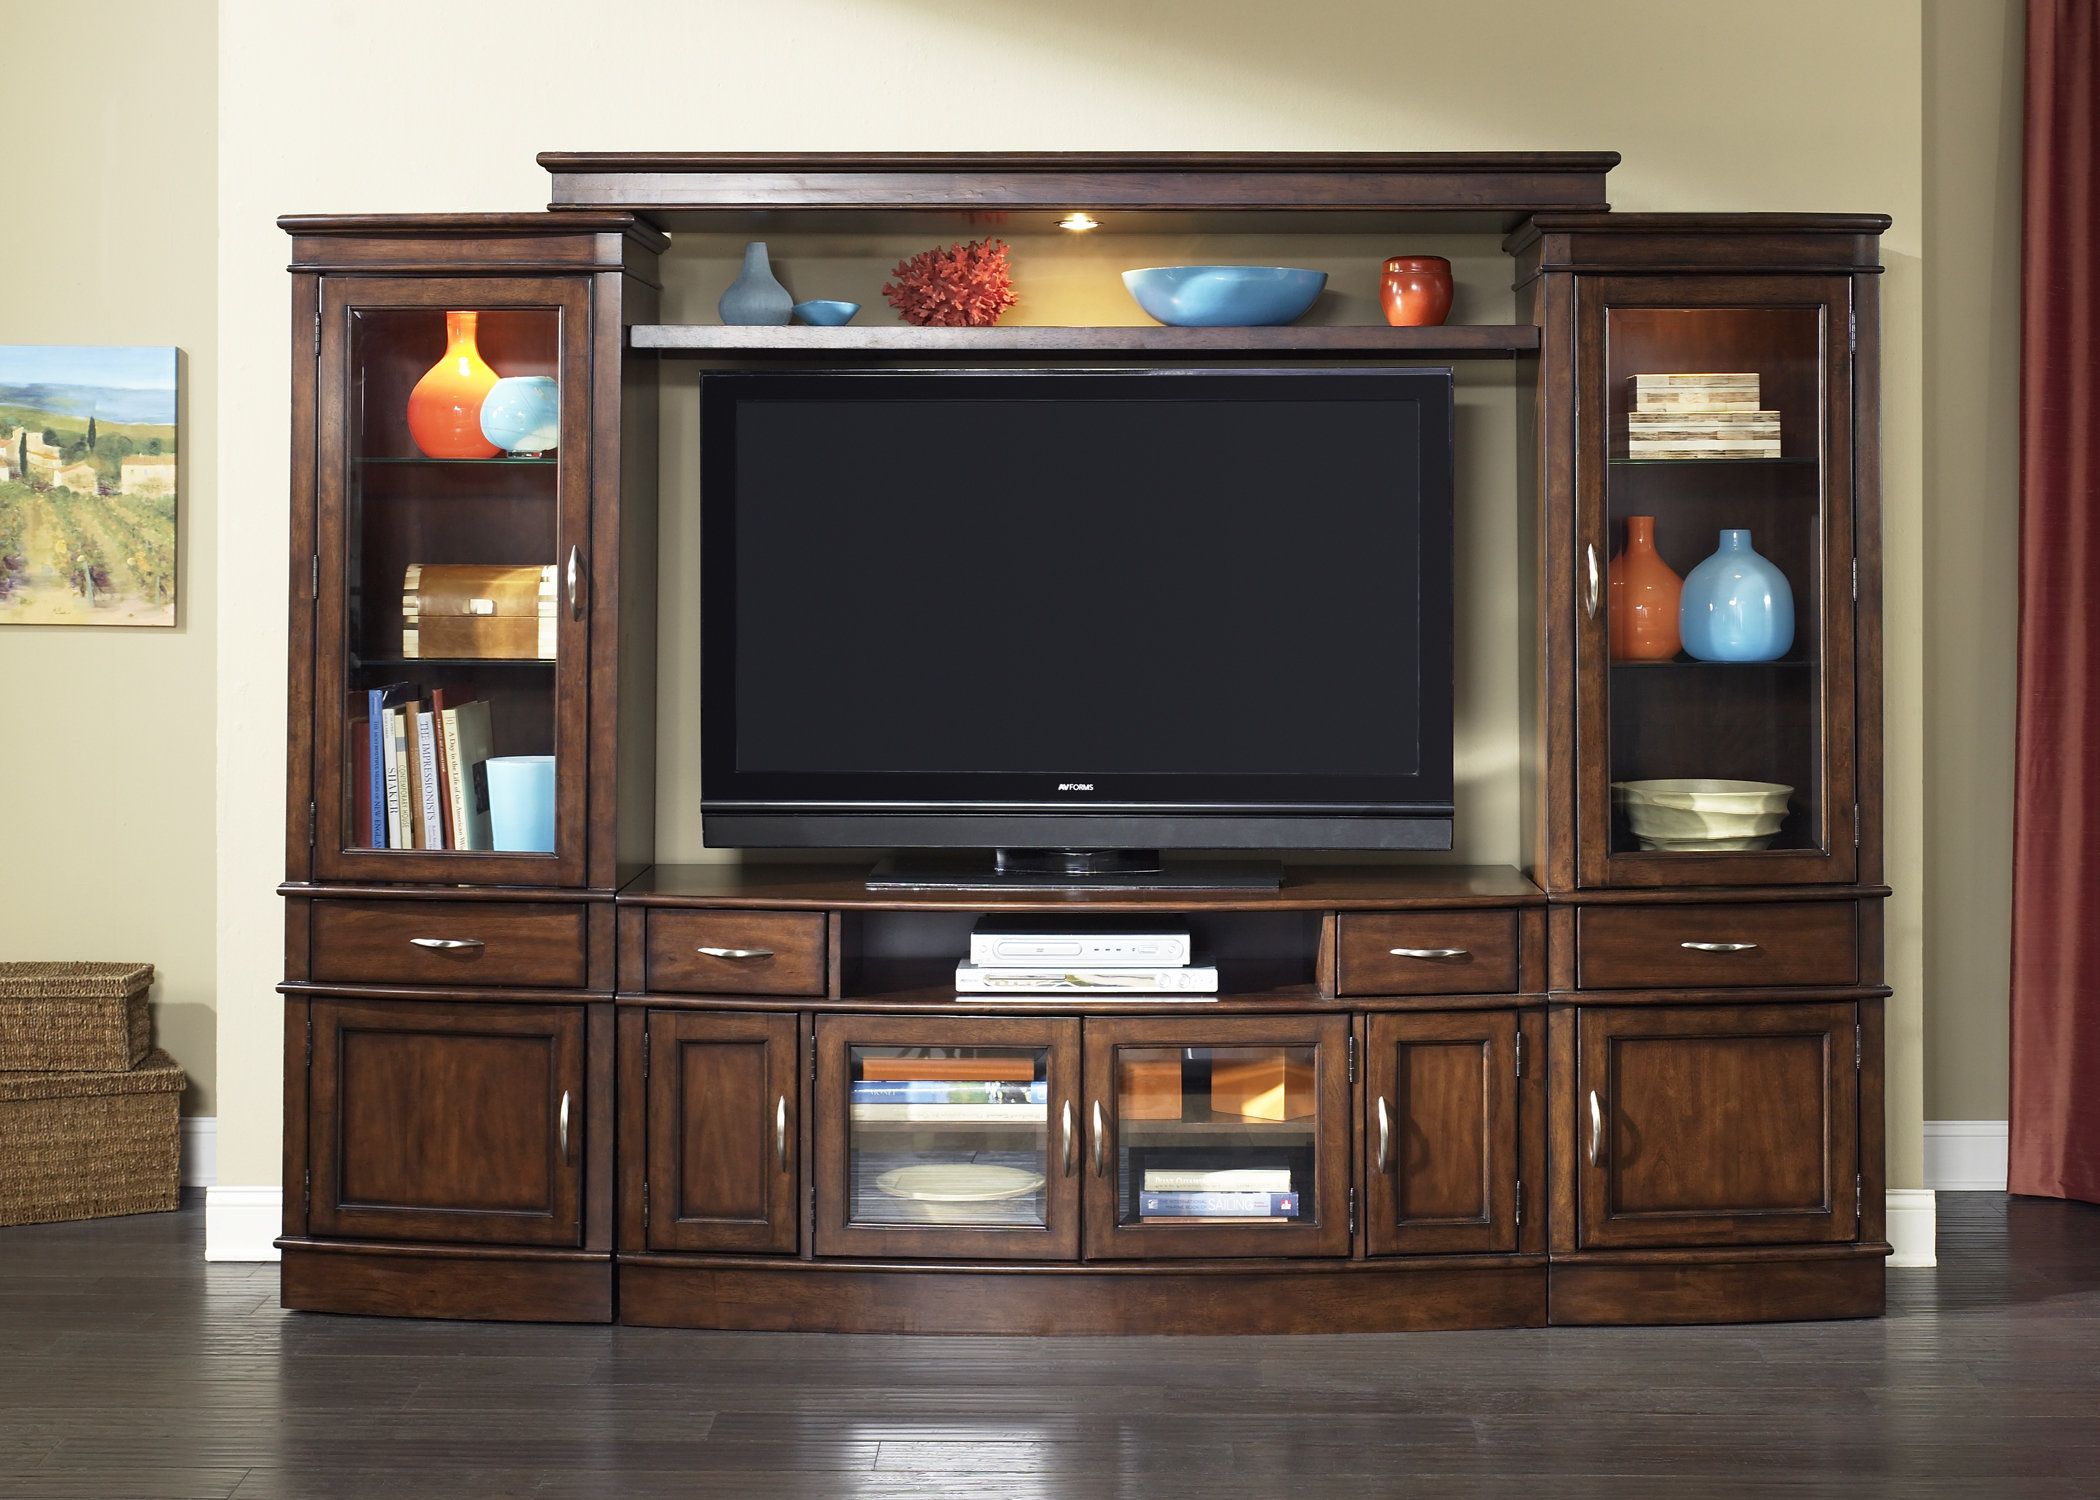 Tv Stands With Hutch You'll Love | Wayfair Regarding Kilian Grey 49 Inch Tv Stands (View 4 of 30)